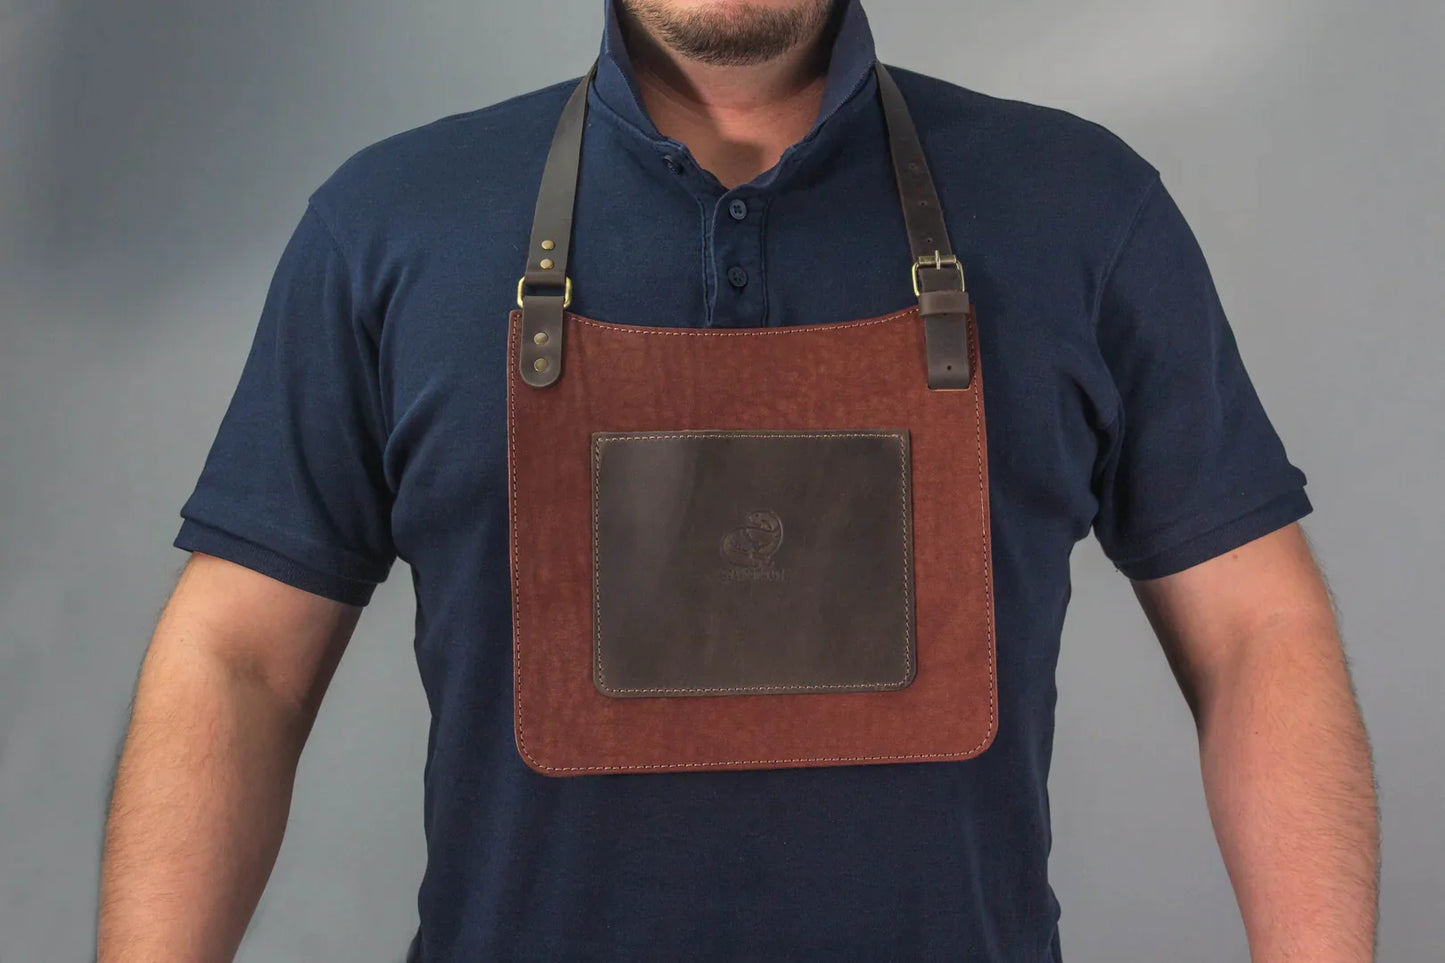 AP5 – Adjustable Leather Carving Bib for Chest Protection